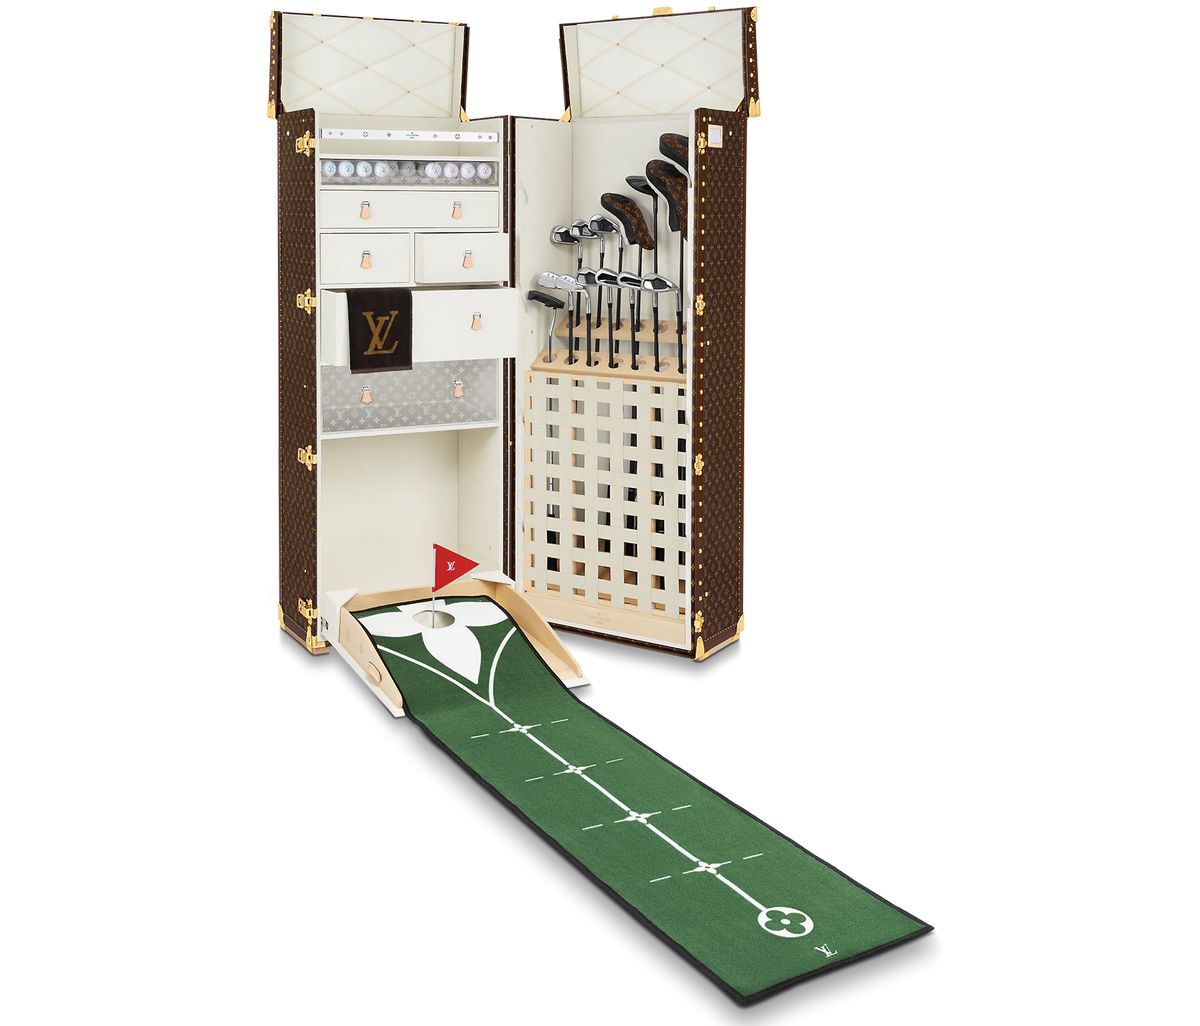 Louis Vuitton presents a golf trunk that comes with a built-in putting mat